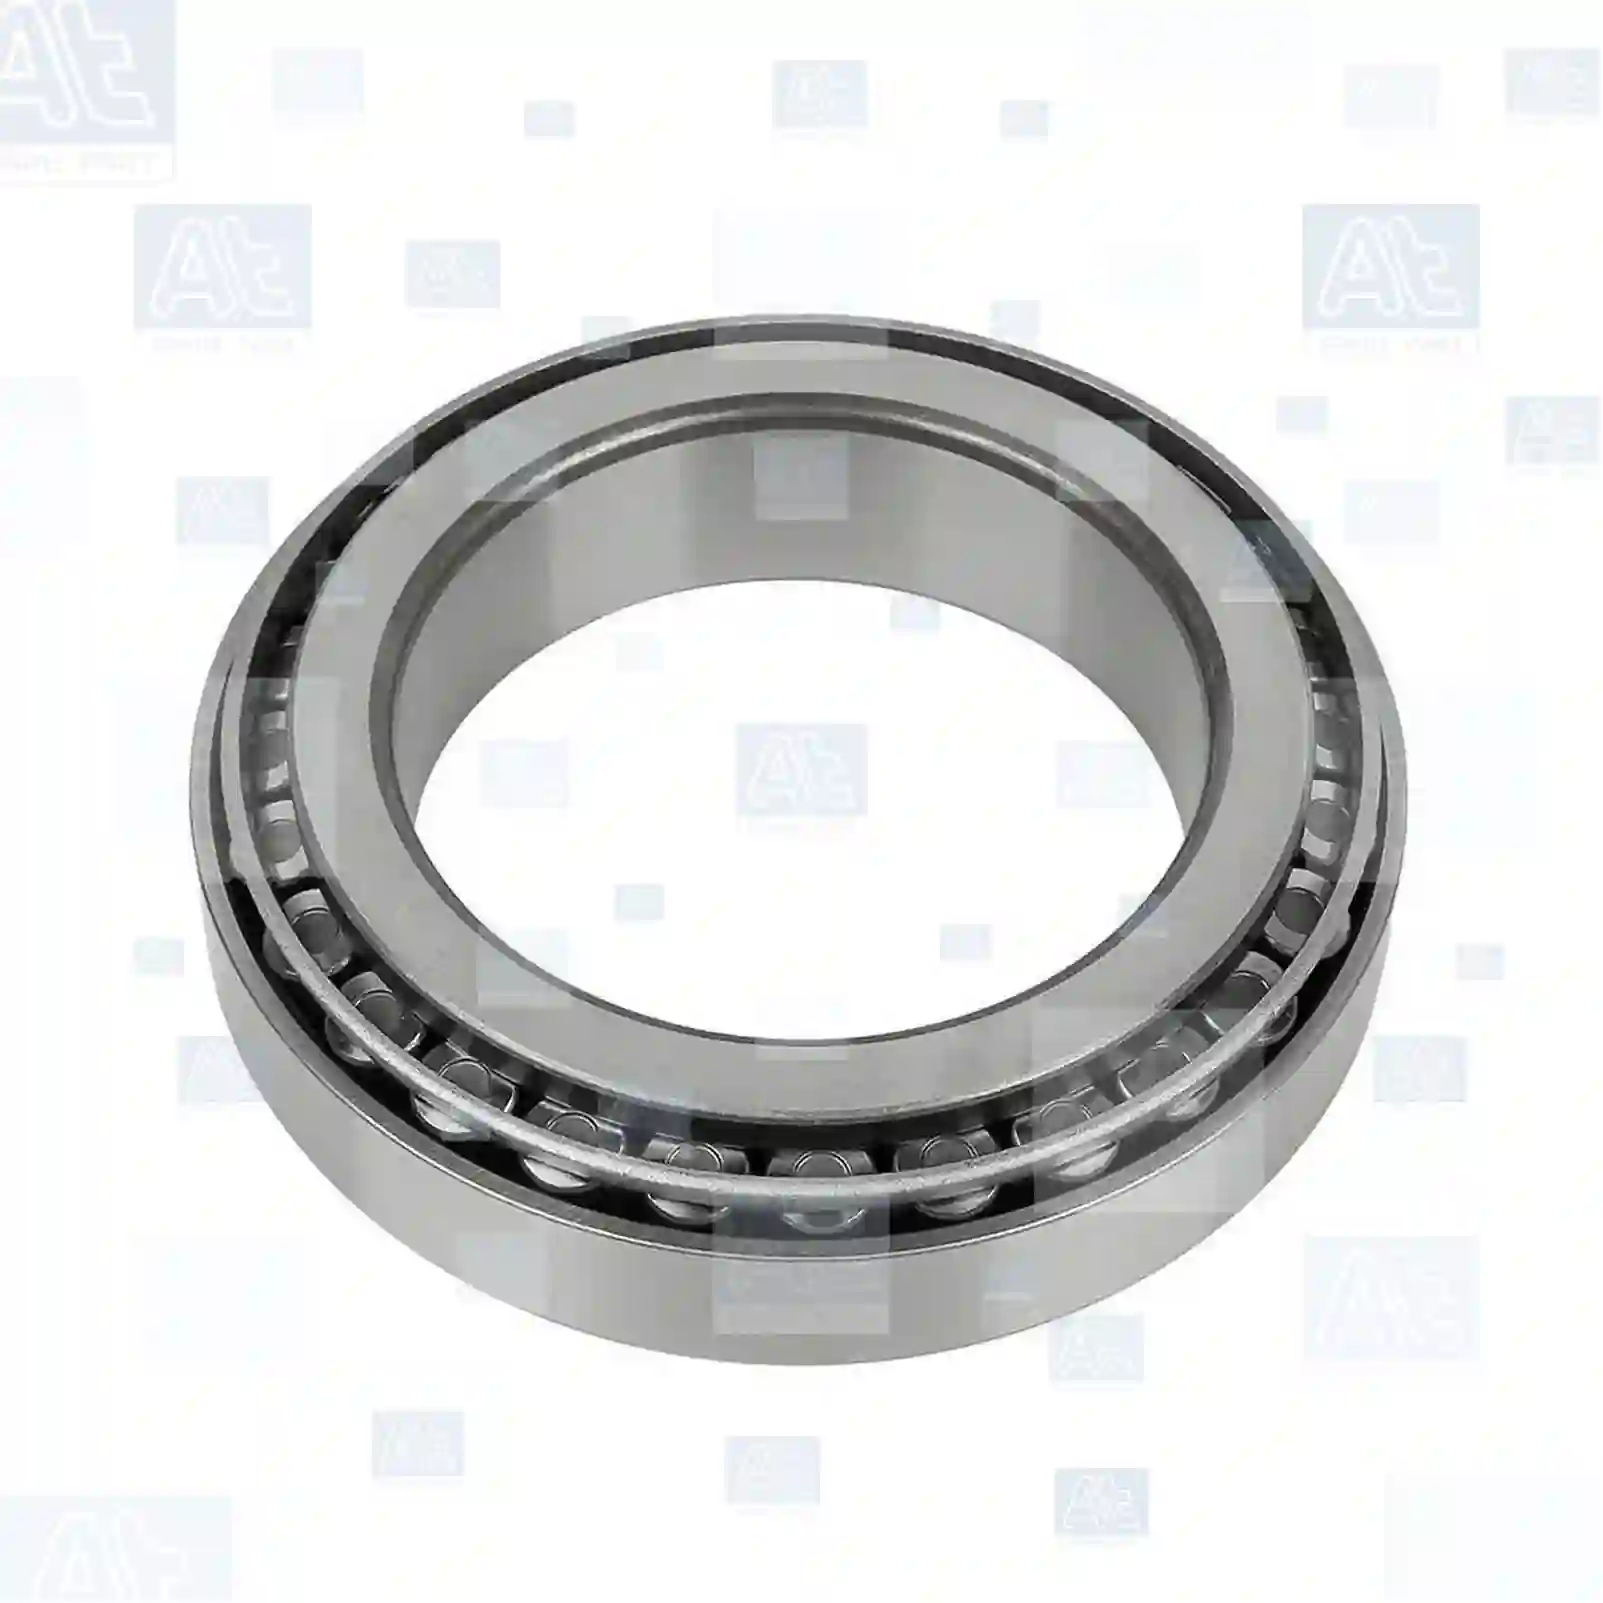 Tapered roller bearing, at no 77726416, oem no: 65699574, 65699674, 01104922, 9442198, 01104922, 01905306, 08190538, 08193819, 1104922, 1905306, 23336044, 5001843131, 8190538, 8193819, 06324801600, 06324890070, 06324890071, 06324890116, 0009814418, 0039812505, 003981250567, 0039812705, 0099819401, 0109817005, 0109817705, 0023336044, 7420582548, 1415140, 6691453000, 20582548, 8171087 At Spare Part | Engine, Accelerator Pedal, Camshaft, Connecting Rod, Crankcase, Crankshaft, Cylinder Head, Engine Suspension Mountings, Exhaust Manifold, Exhaust Gas Recirculation, Filter Kits, Flywheel Housing, General Overhaul Kits, Engine, Intake Manifold, Oil Cleaner, Oil Cooler, Oil Filter, Oil Pump, Oil Sump, Piston & Liner, Sensor & Switch, Timing Case, Turbocharger, Cooling System, Belt Tensioner, Coolant Filter, Coolant Pipe, Corrosion Prevention Agent, Drive, Expansion Tank, Fan, Intercooler, Monitors & Gauges, Radiator, Thermostat, V-Belt / Timing belt, Water Pump, Fuel System, Electronical Injector Unit, Feed Pump, Fuel Filter, cpl., Fuel Gauge Sender,  Fuel Line, Fuel Pump, Fuel Tank, Injection Line Kit, Injection Pump, Exhaust System, Clutch & Pedal, Gearbox, Propeller Shaft, Axles, Brake System, Hubs & Wheels, Suspension, Leaf Spring, Universal Parts / Accessories, Steering, Electrical System, Cabin Tapered roller bearing, at no 77726416, oem no: 65699574, 65699674, 01104922, 9442198, 01104922, 01905306, 08190538, 08193819, 1104922, 1905306, 23336044, 5001843131, 8190538, 8193819, 06324801600, 06324890070, 06324890071, 06324890116, 0009814418, 0039812505, 003981250567, 0039812705, 0099819401, 0109817005, 0109817705, 0023336044, 7420582548, 1415140, 6691453000, 20582548, 8171087 At Spare Part | Engine, Accelerator Pedal, Camshaft, Connecting Rod, Crankcase, Crankshaft, Cylinder Head, Engine Suspension Mountings, Exhaust Manifold, Exhaust Gas Recirculation, Filter Kits, Flywheel Housing, General Overhaul Kits, Engine, Intake Manifold, Oil Cleaner, Oil Cooler, Oil Filter, Oil Pump, Oil Sump, Piston & Liner, Sensor & Switch, Timing Case, Turbocharger, Cooling System, Belt Tensioner, Coolant Filter, Coolant Pipe, Corrosion Prevention Agent, Drive, Expansion Tank, Fan, Intercooler, Monitors & Gauges, Radiator, Thermostat, V-Belt / Timing belt, Water Pump, Fuel System, Electronical Injector Unit, Feed Pump, Fuel Filter, cpl., Fuel Gauge Sender,  Fuel Line, Fuel Pump, Fuel Tank, Injection Line Kit, Injection Pump, Exhaust System, Clutch & Pedal, Gearbox, Propeller Shaft, Axles, Brake System, Hubs & Wheels, Suspension, Leaf Spring, Universal Parts / Accessories, Steering, Electrical System, Cabin